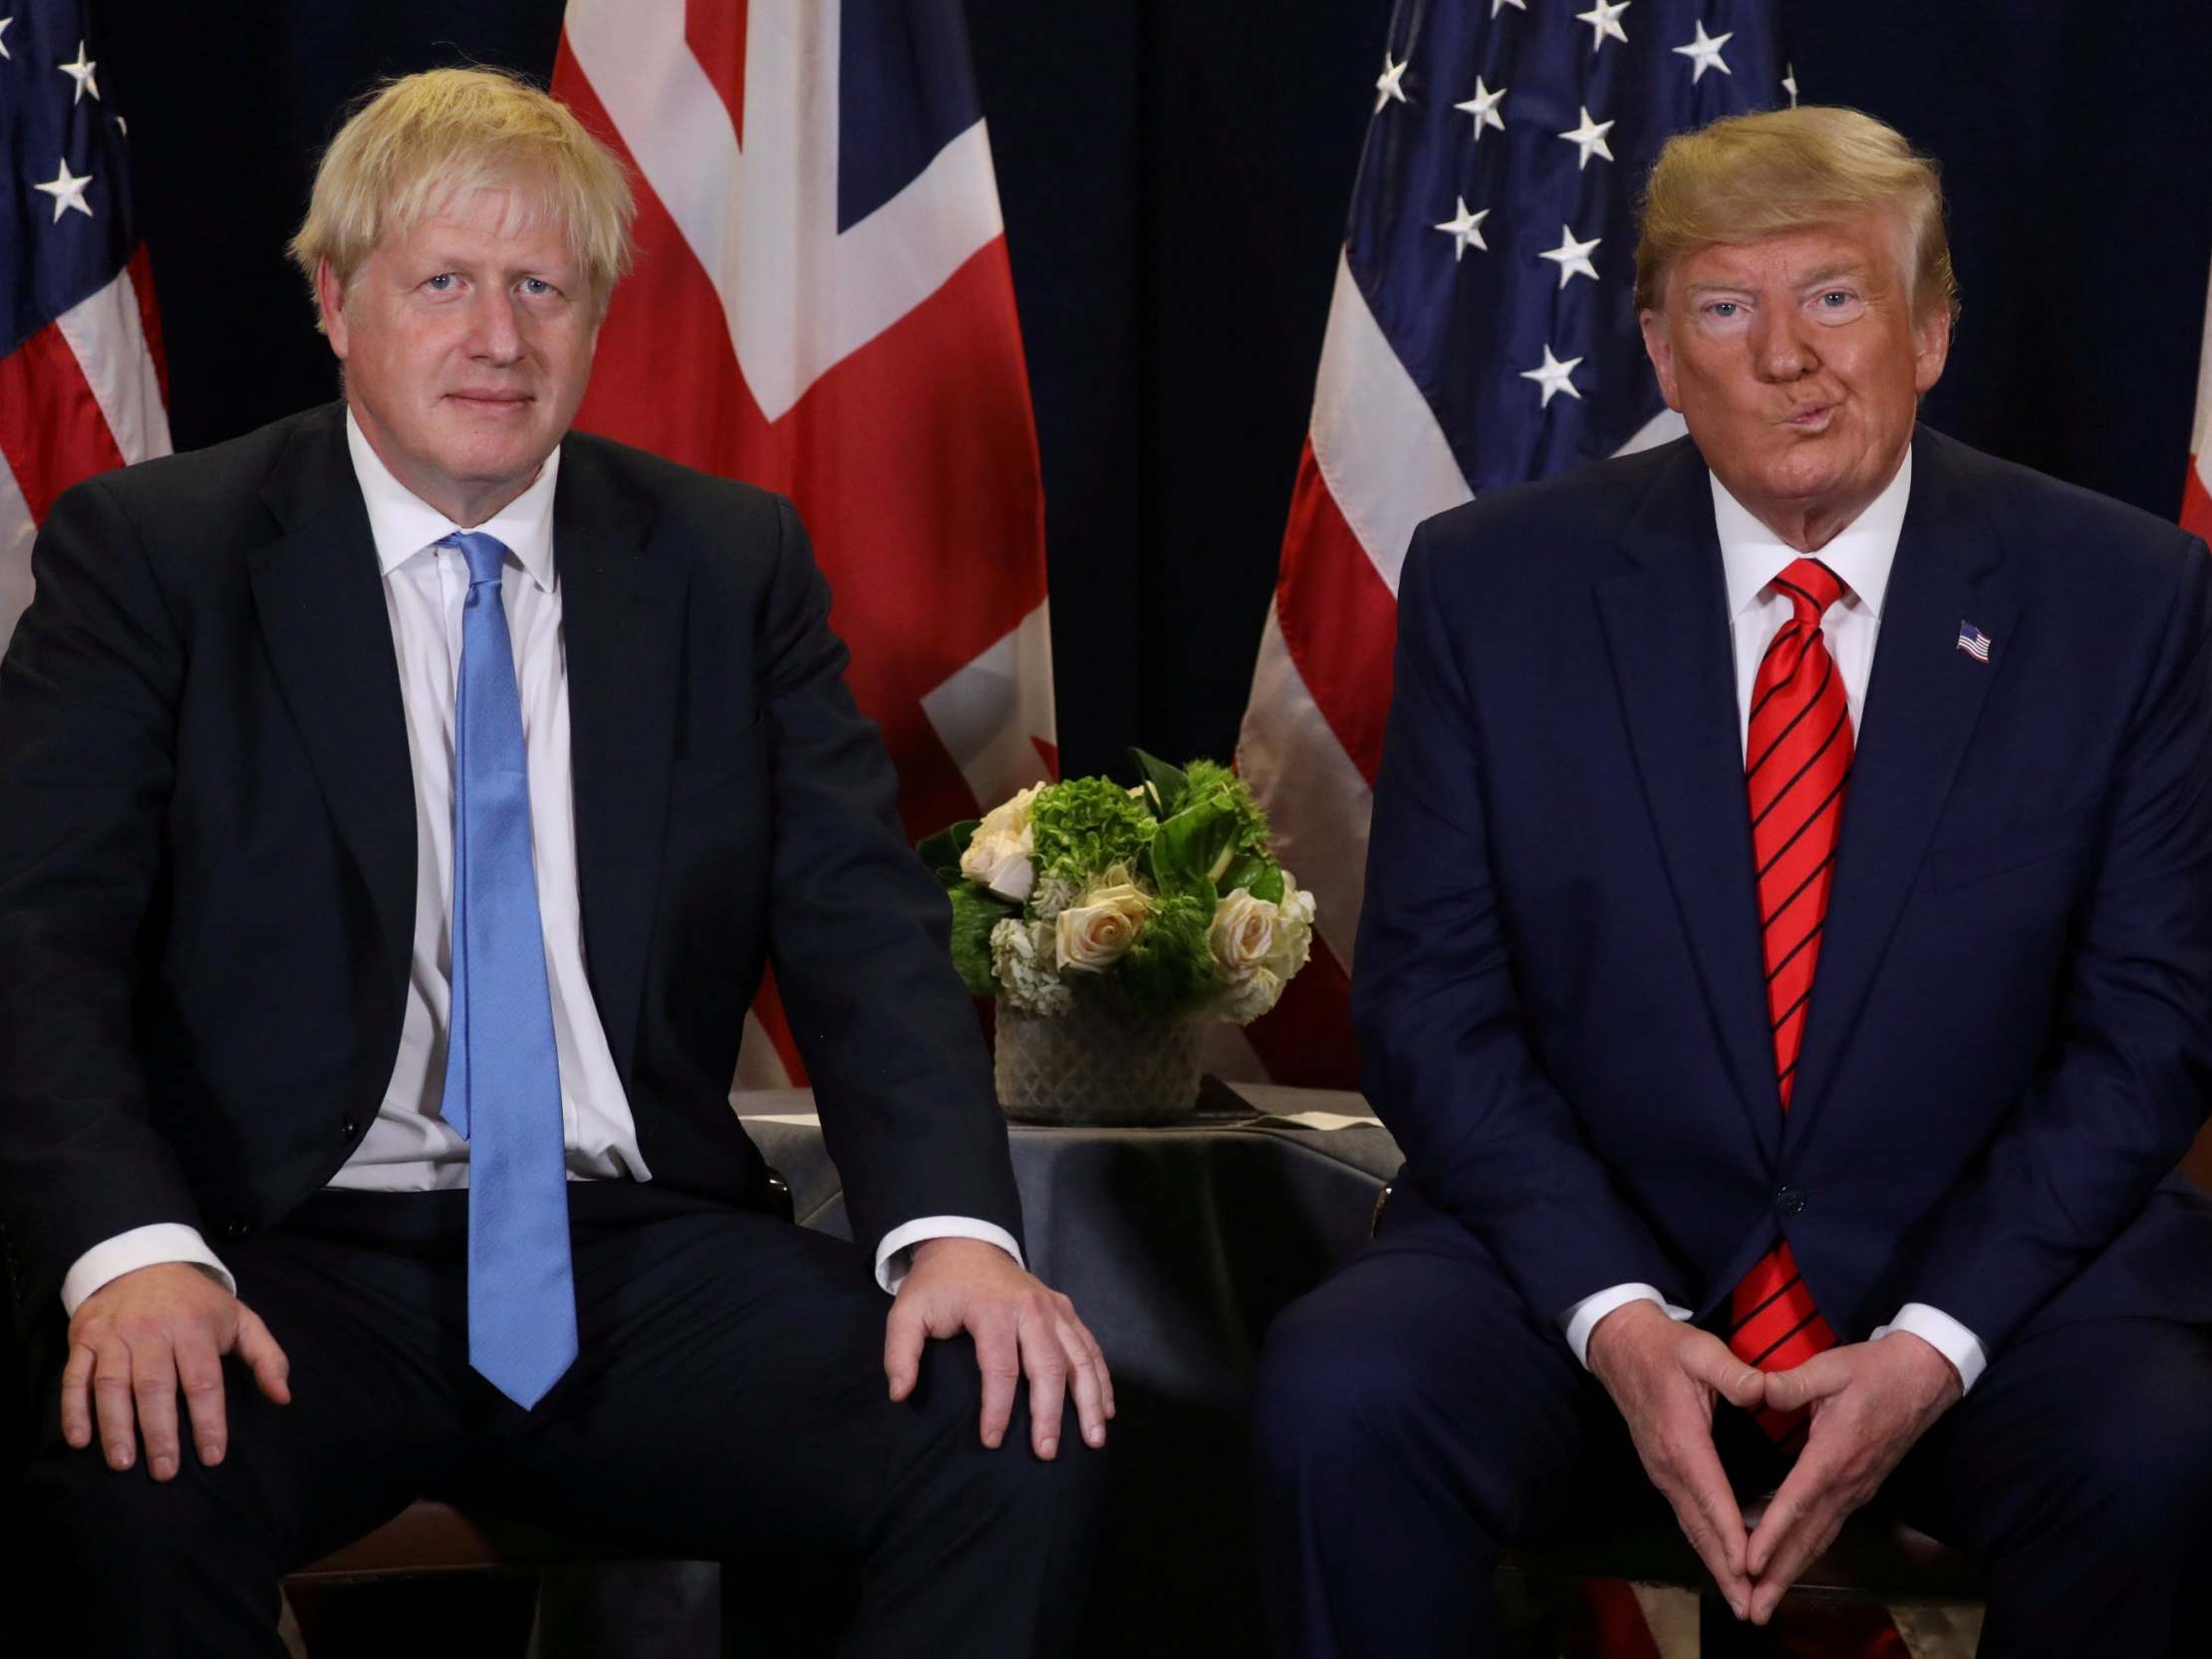 Boris Johnson would like to see Donald Trump’s White House tenure end at one term